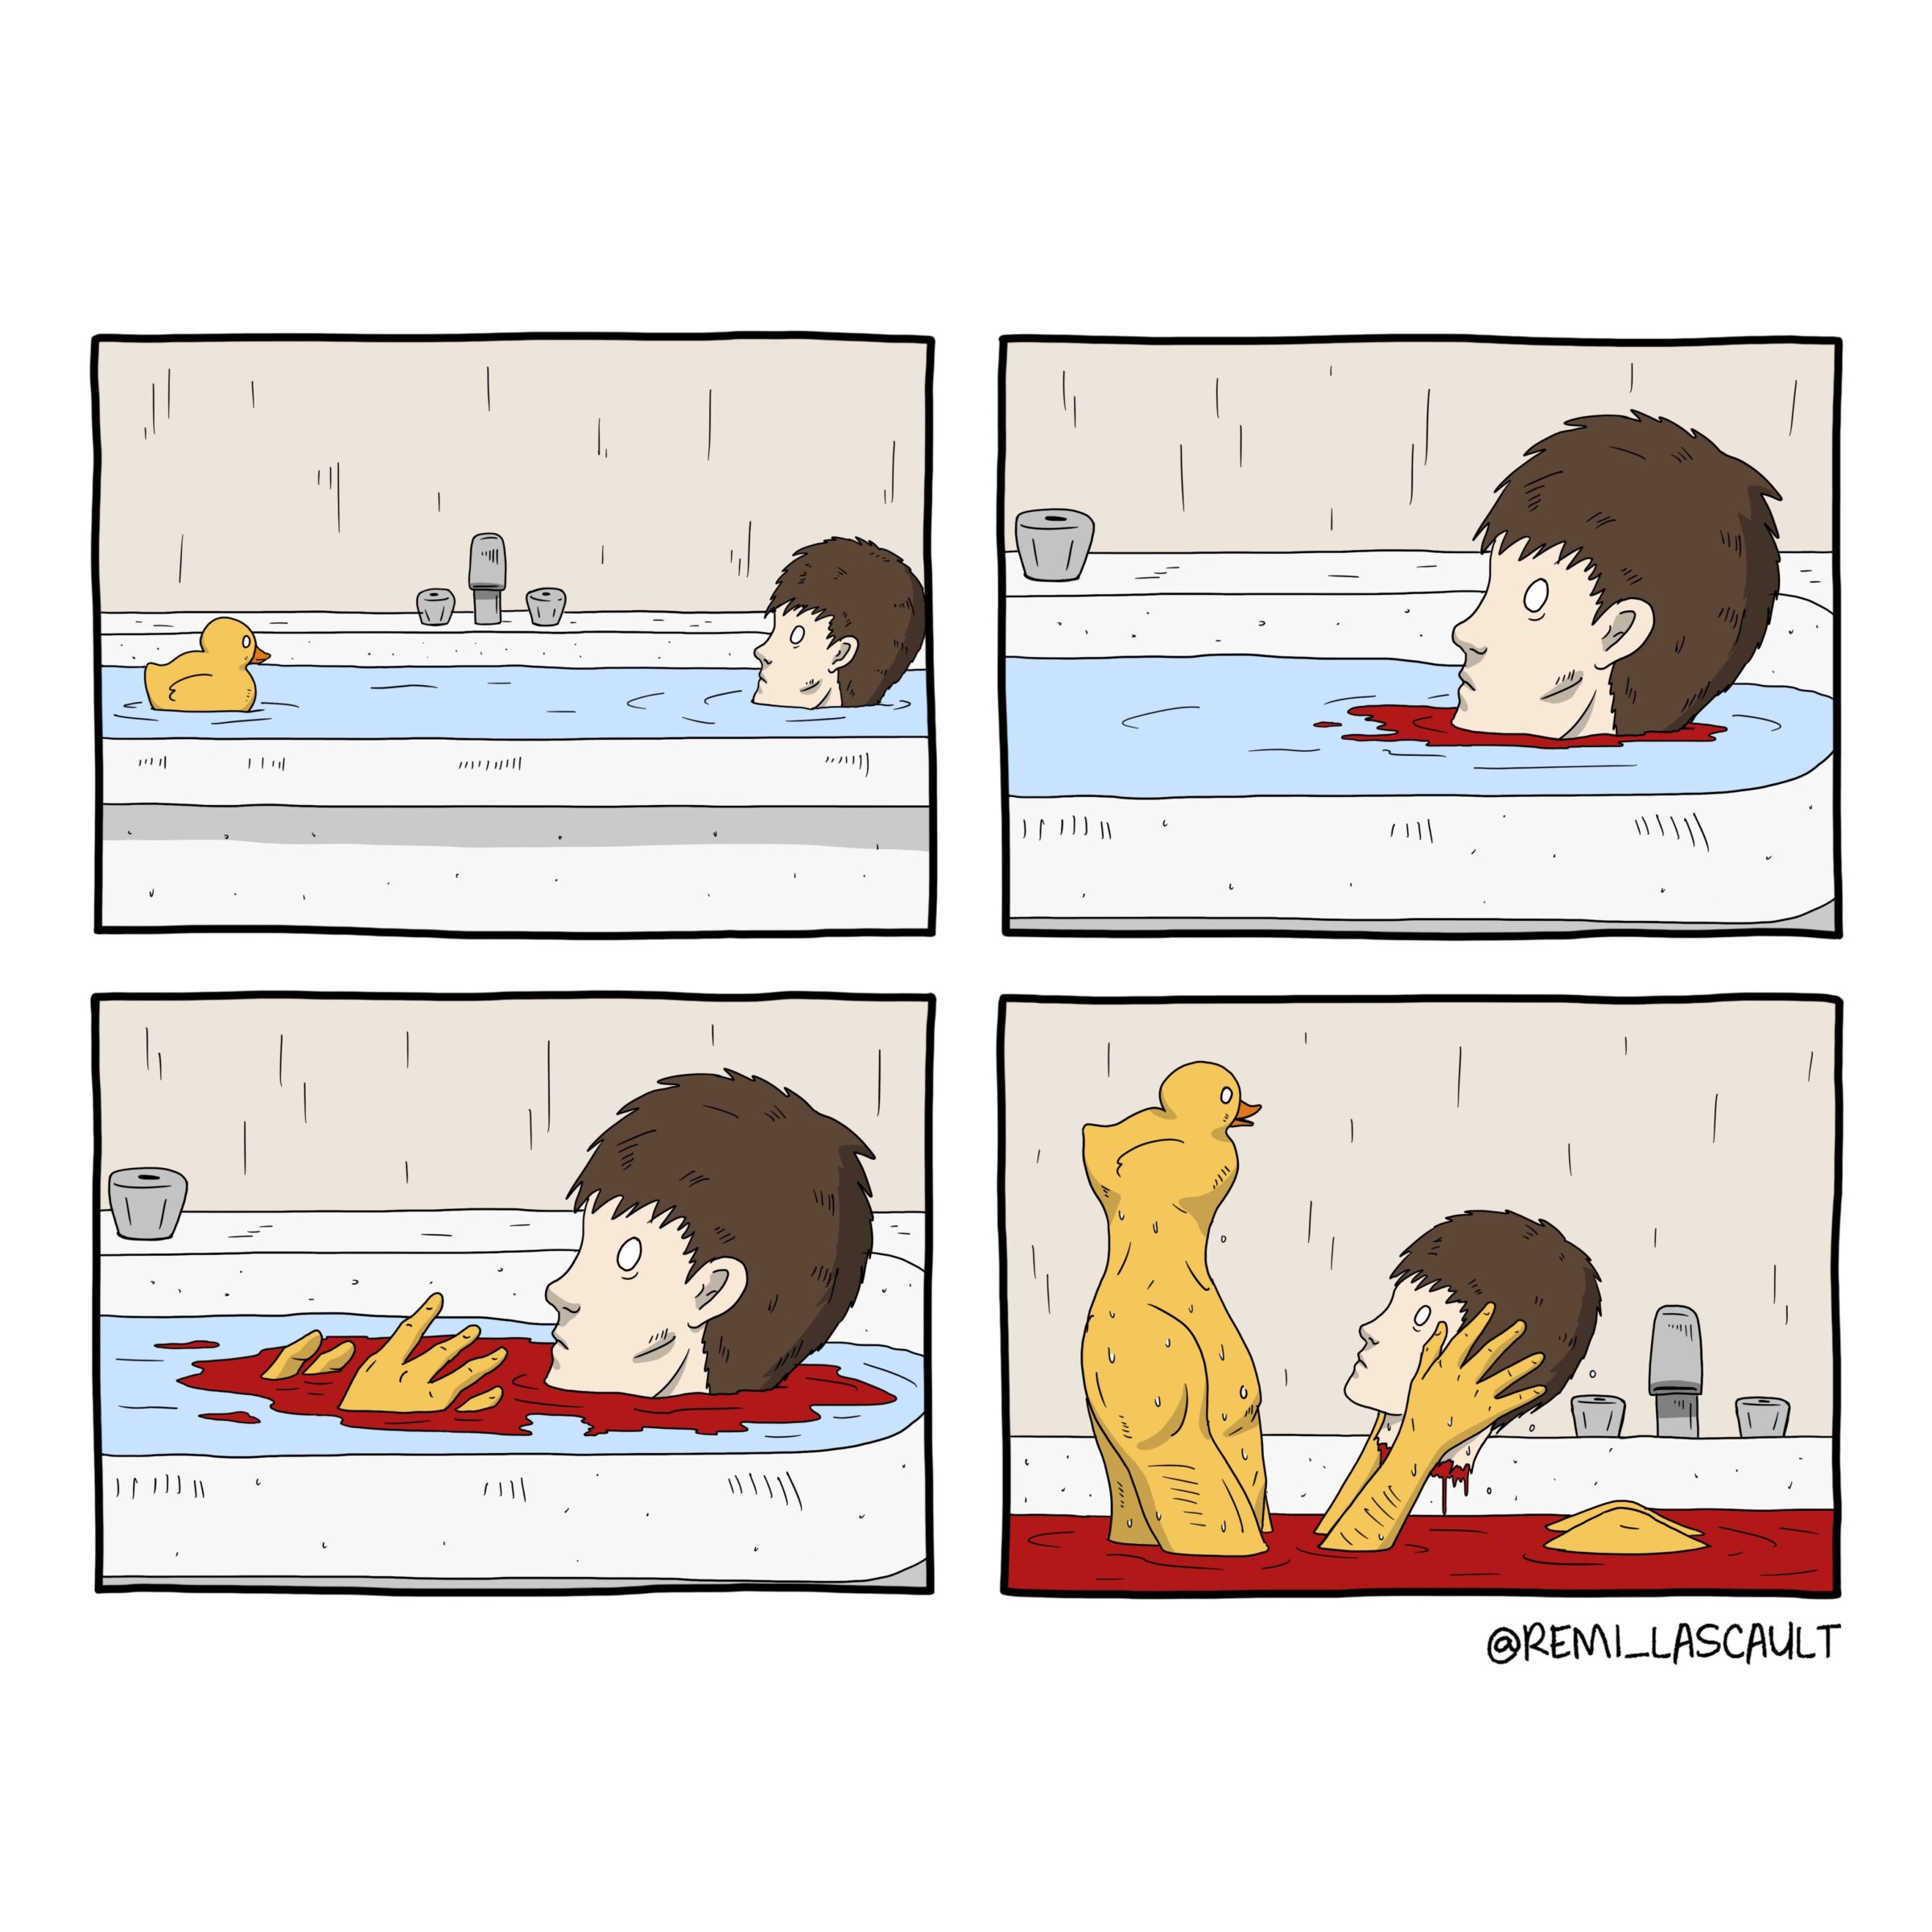  playing in the bath(from remi_lascault), Playing Comics  playing in the bath(from remi_lascault), Playing text: 丄 〕 n s 一 I\N 